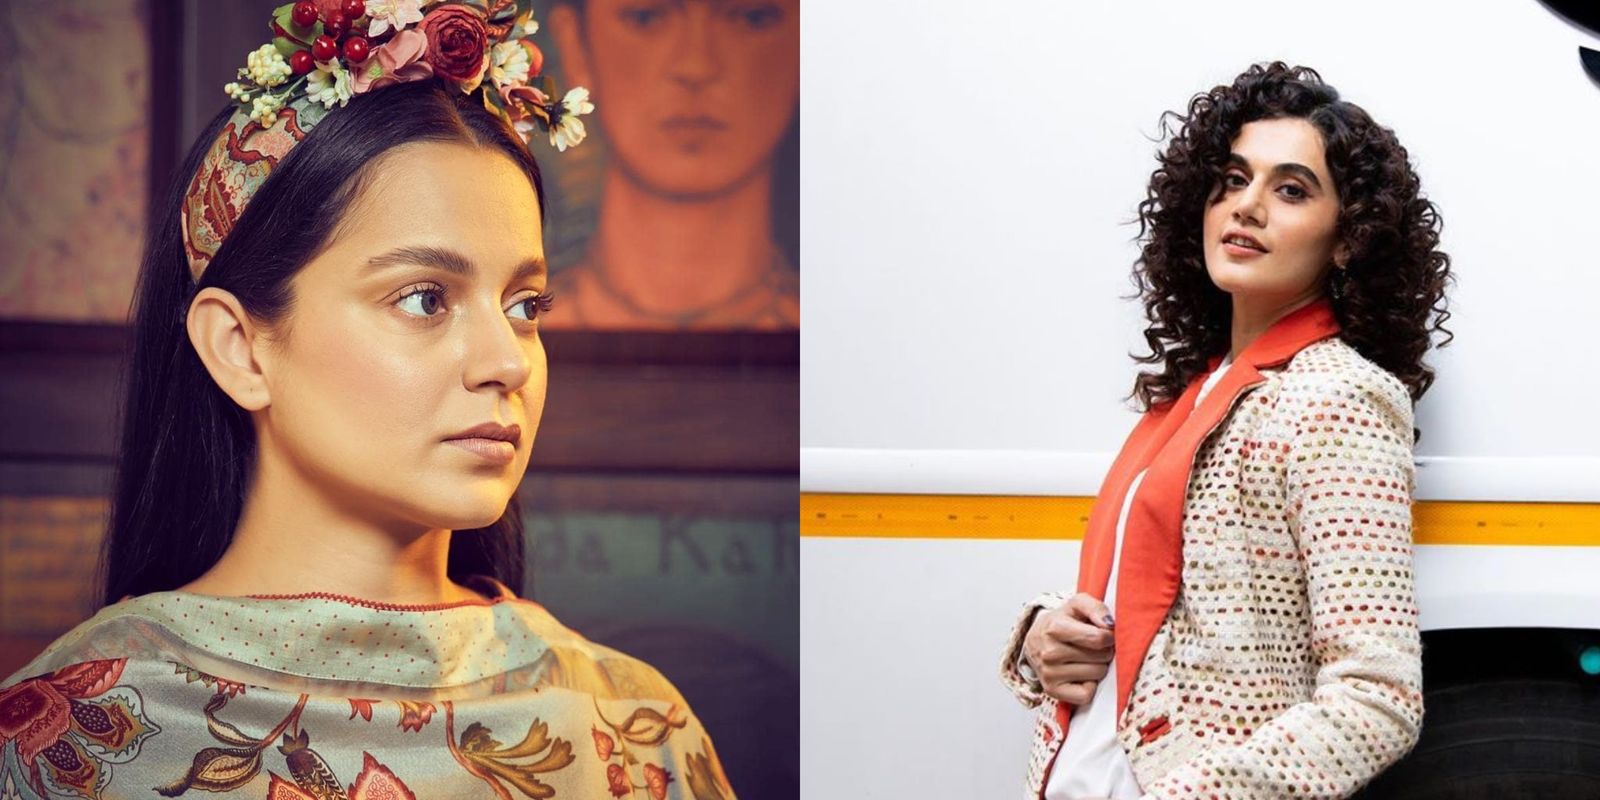 Taapsee Pannu Says Respect Is Not Commanded, Shares Interview Of Kangana Calling Manikarnika Co-Star ‘Chota Mota Actor’